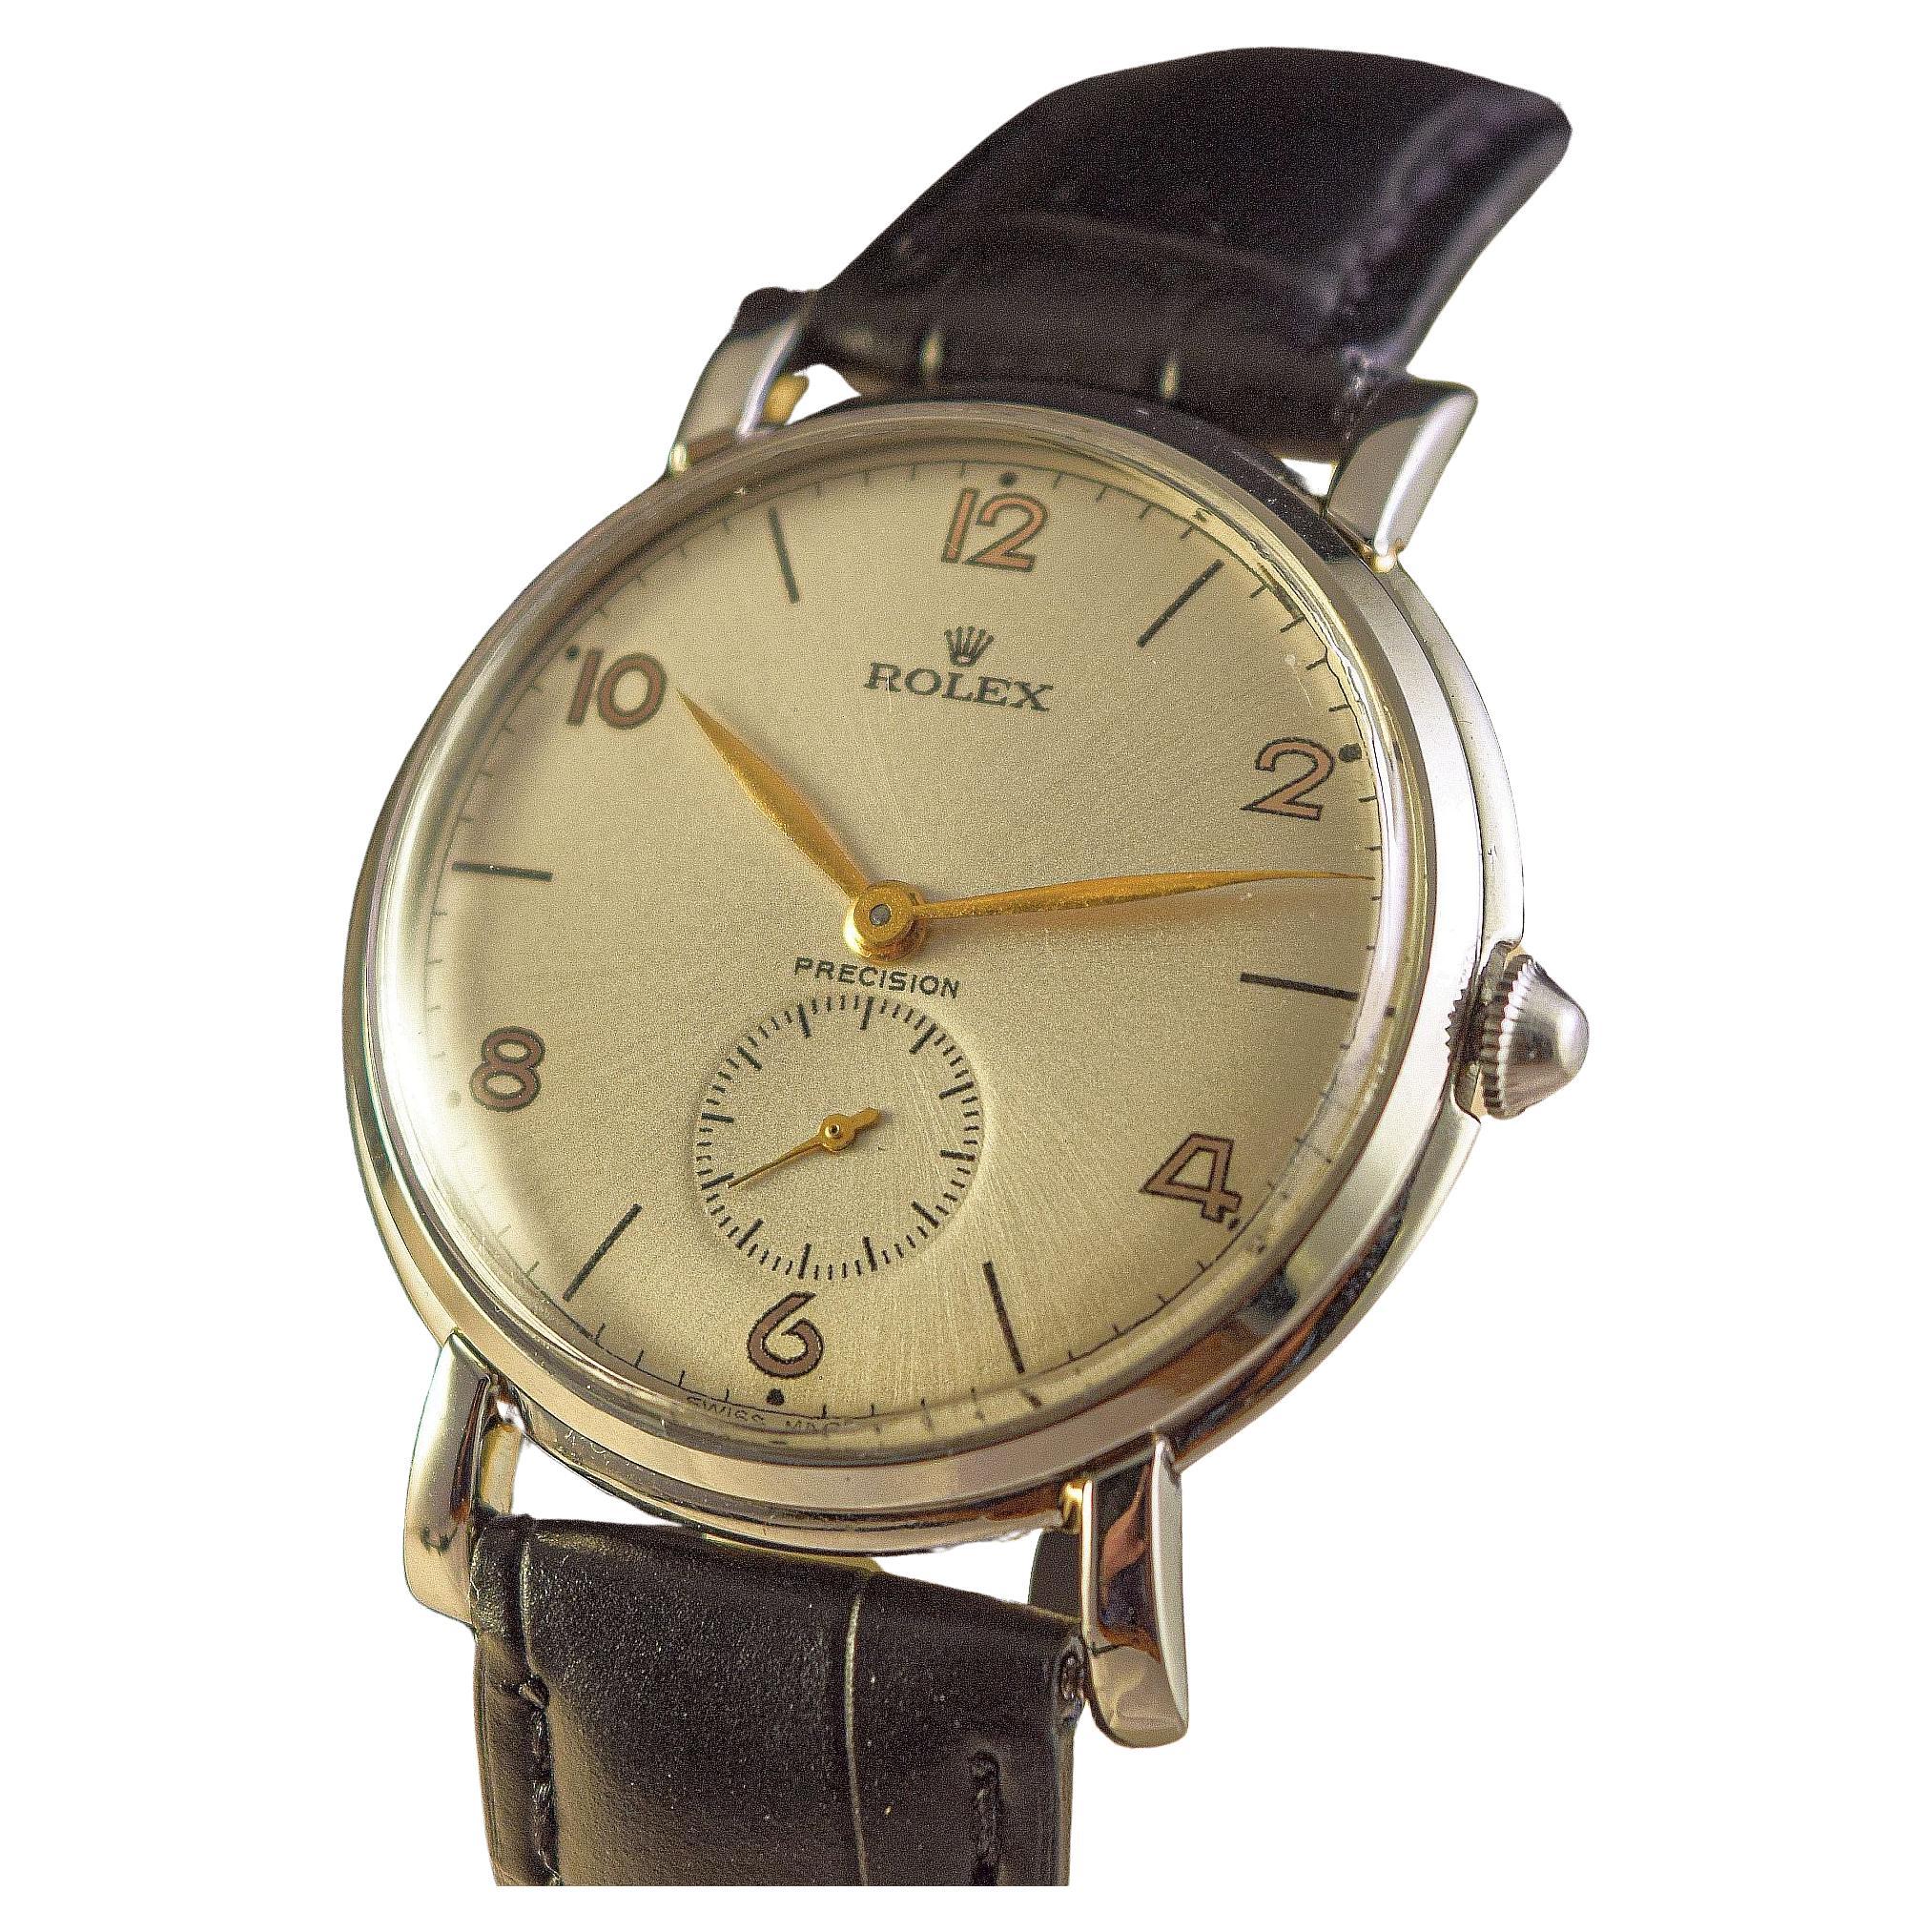 Rolex Ref 4224
Very rare steel cased oversize-Jumbo-Rolex watch
with beautiful unusual lugs.1950's
Tear drop lugs
This watch is a Collectors dream.
Original winder-associated original Rolex steel buckle.
We have fitted a real leather strap as the